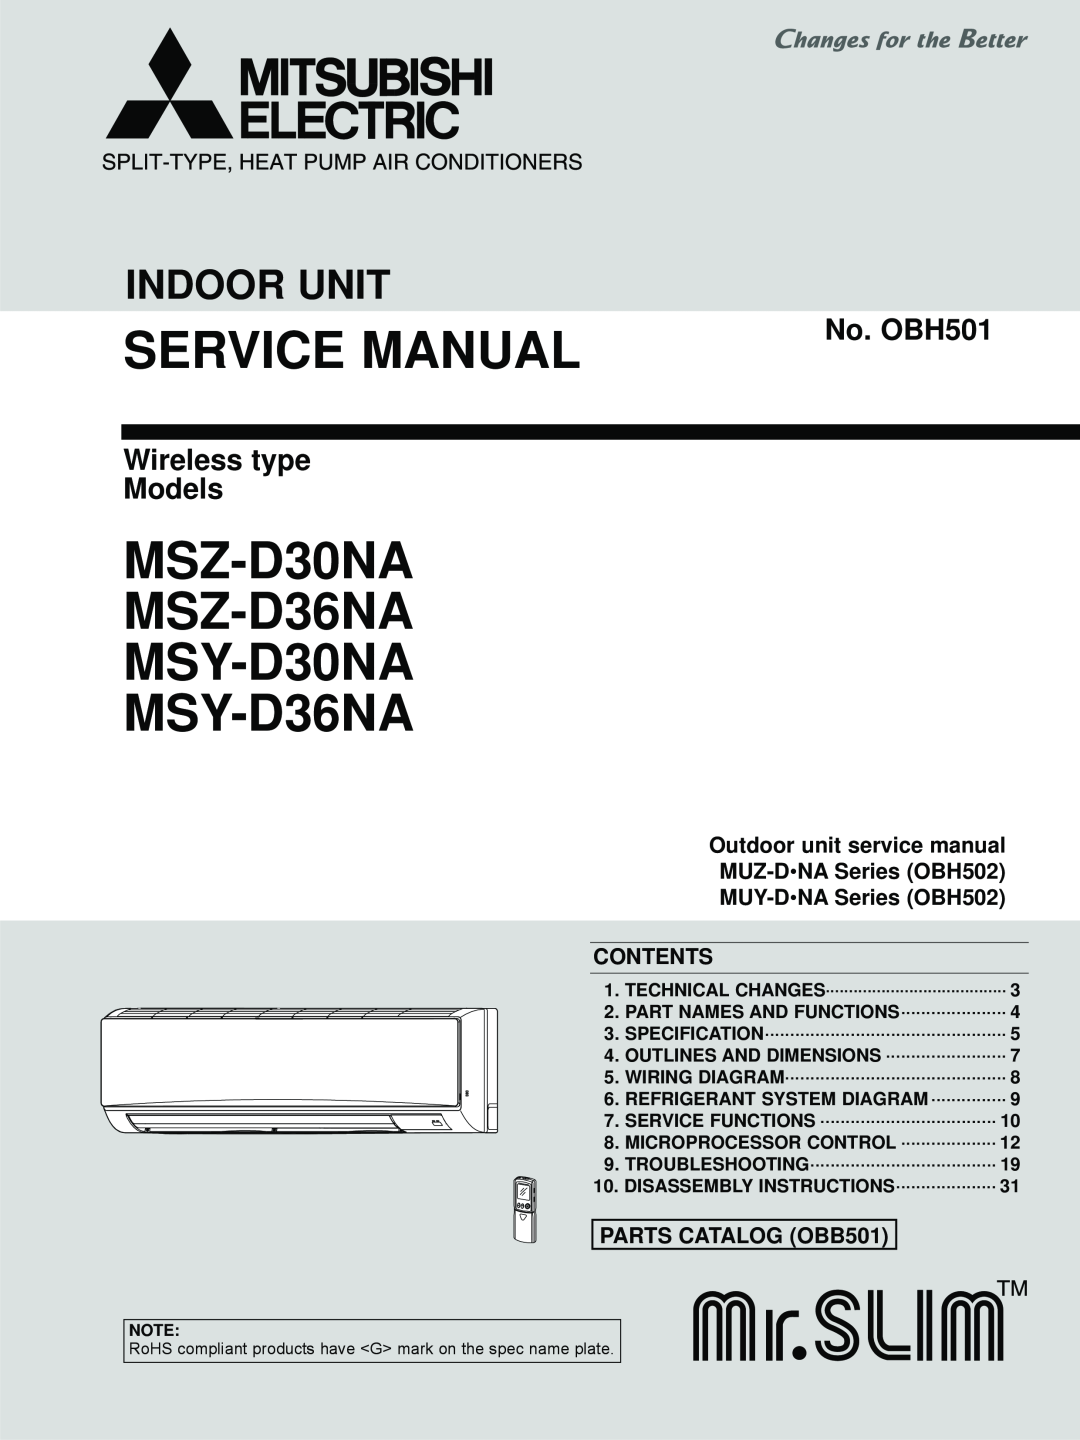 Vermont Casting MSZ-D30NA service manual No. OBH501, Wireless type Models, MUY-D NASeries OBH502 CONTENTS, Indoor Unit 